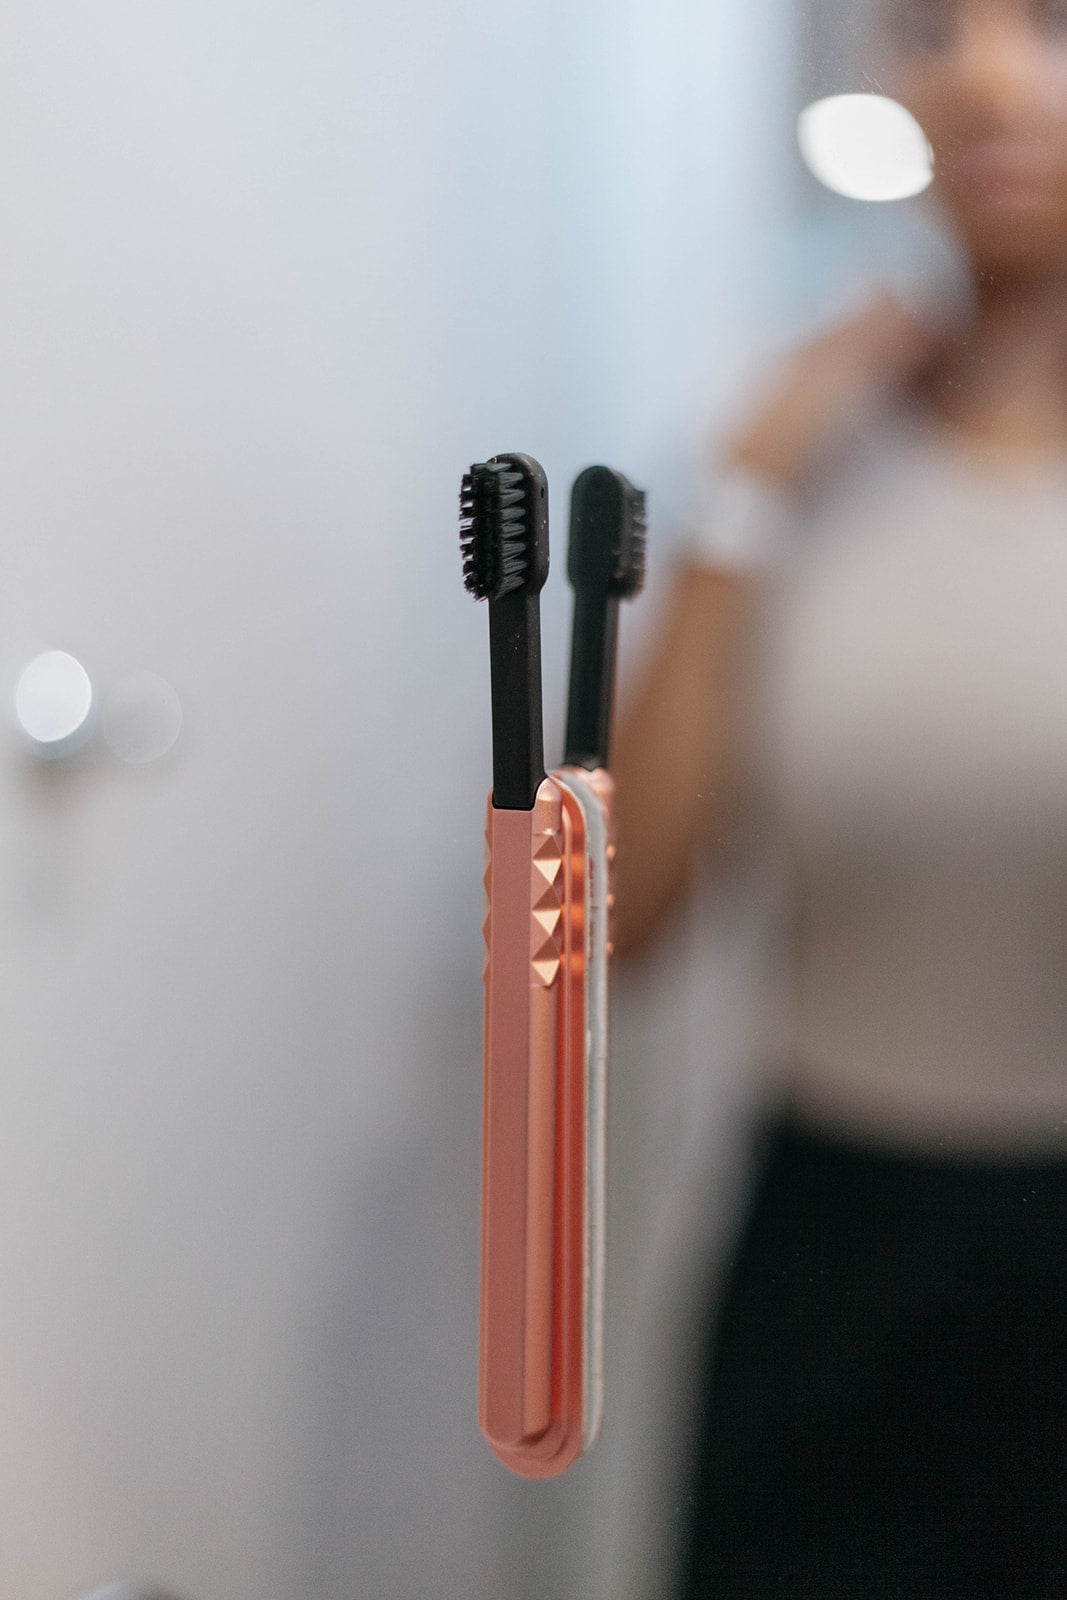 Starter Kit Rose Gold Aluminum Brush Handle and Biodegradable Brush presented with Magnetic Strip on Mirror